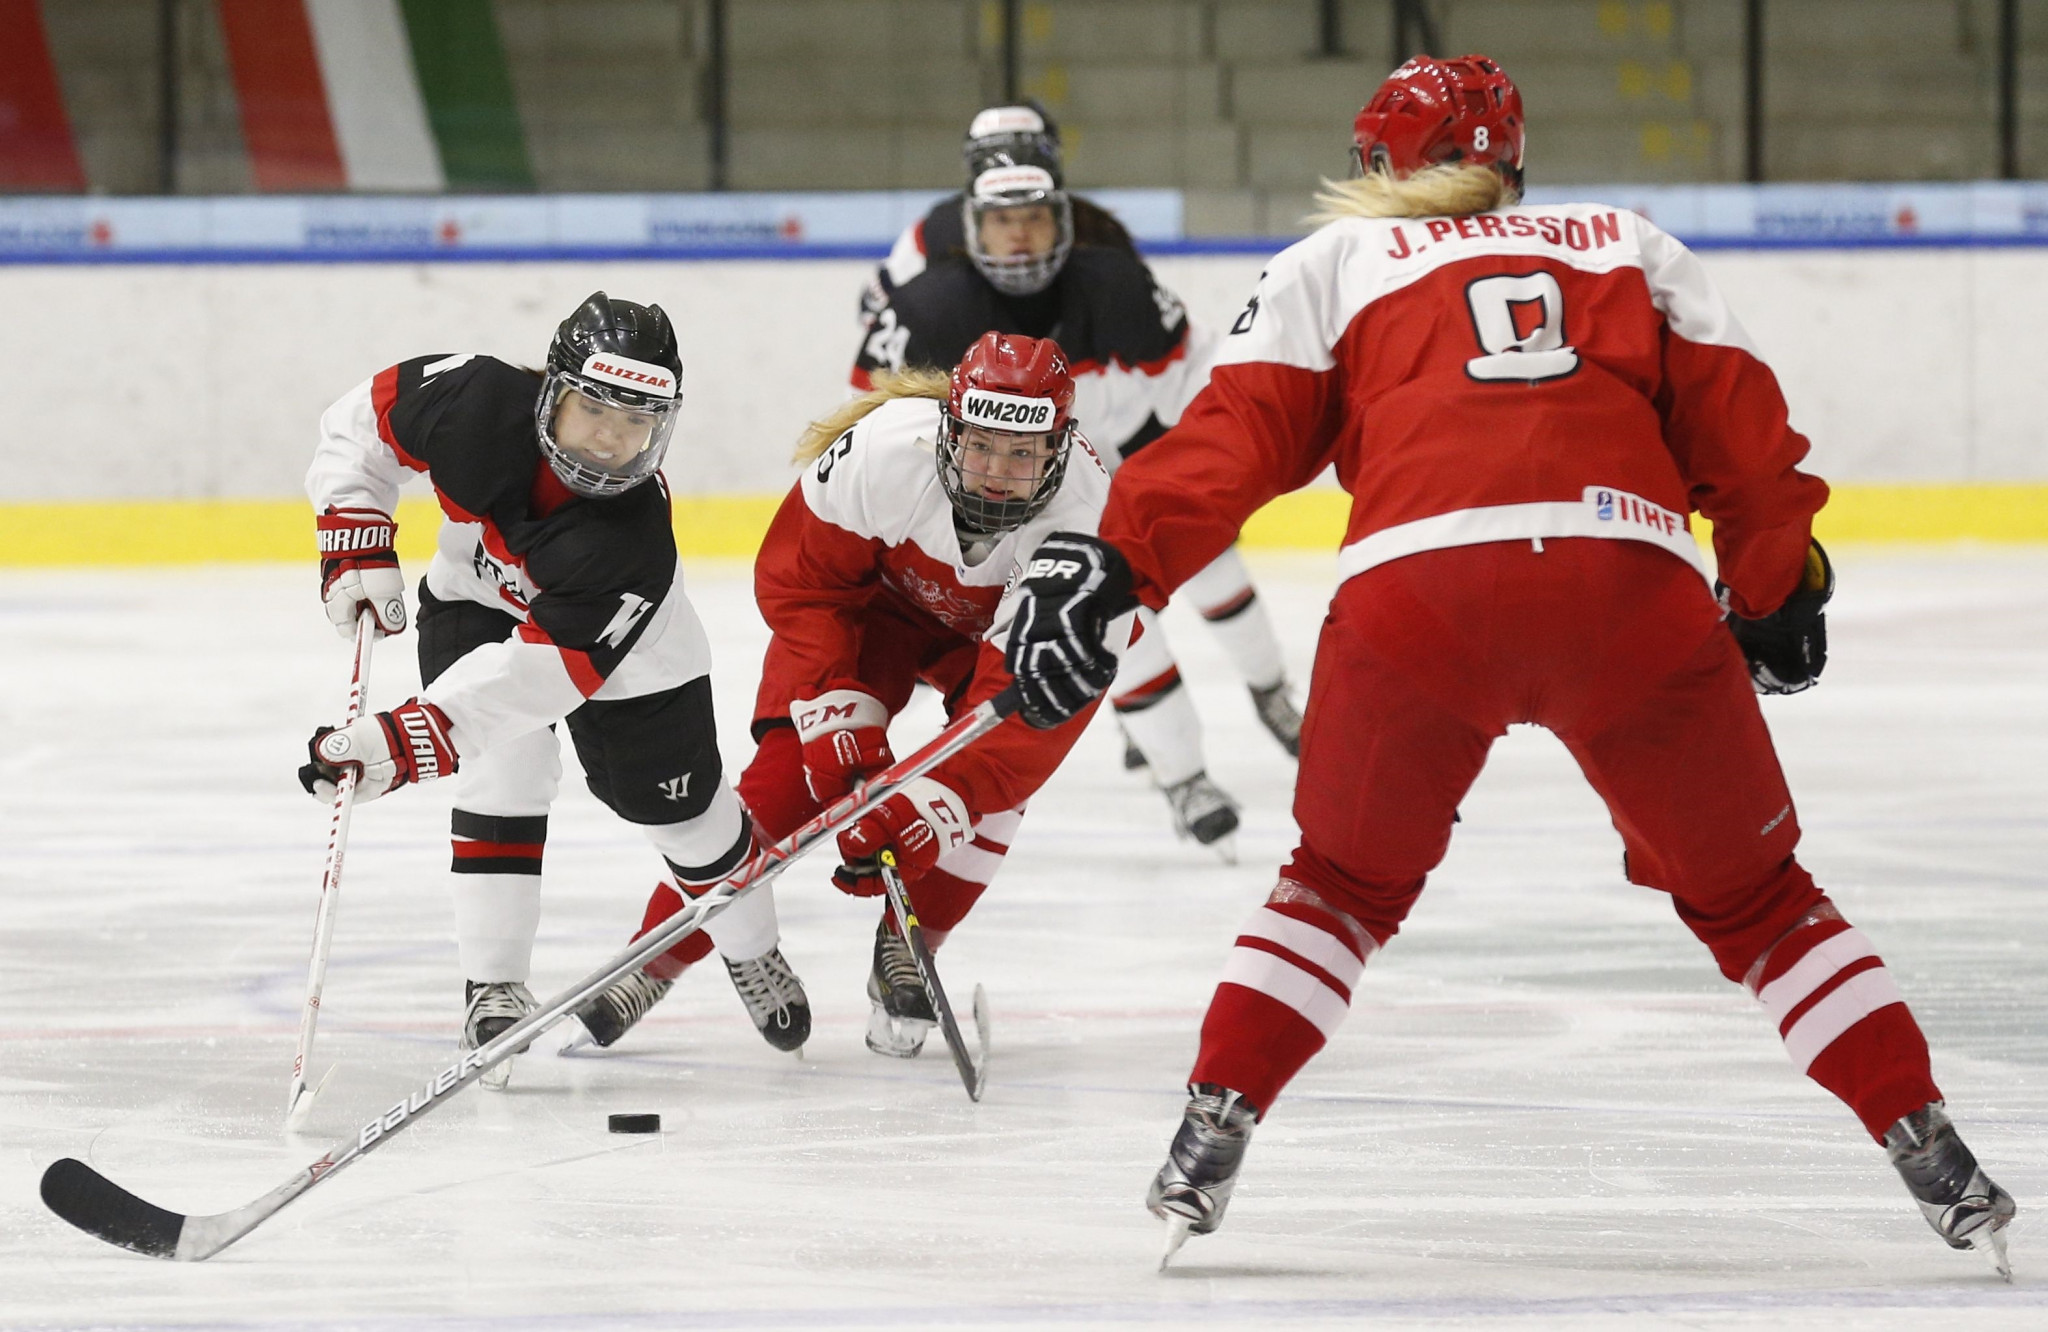 IIHF looking for increased female participation with Inspire the Next scheme